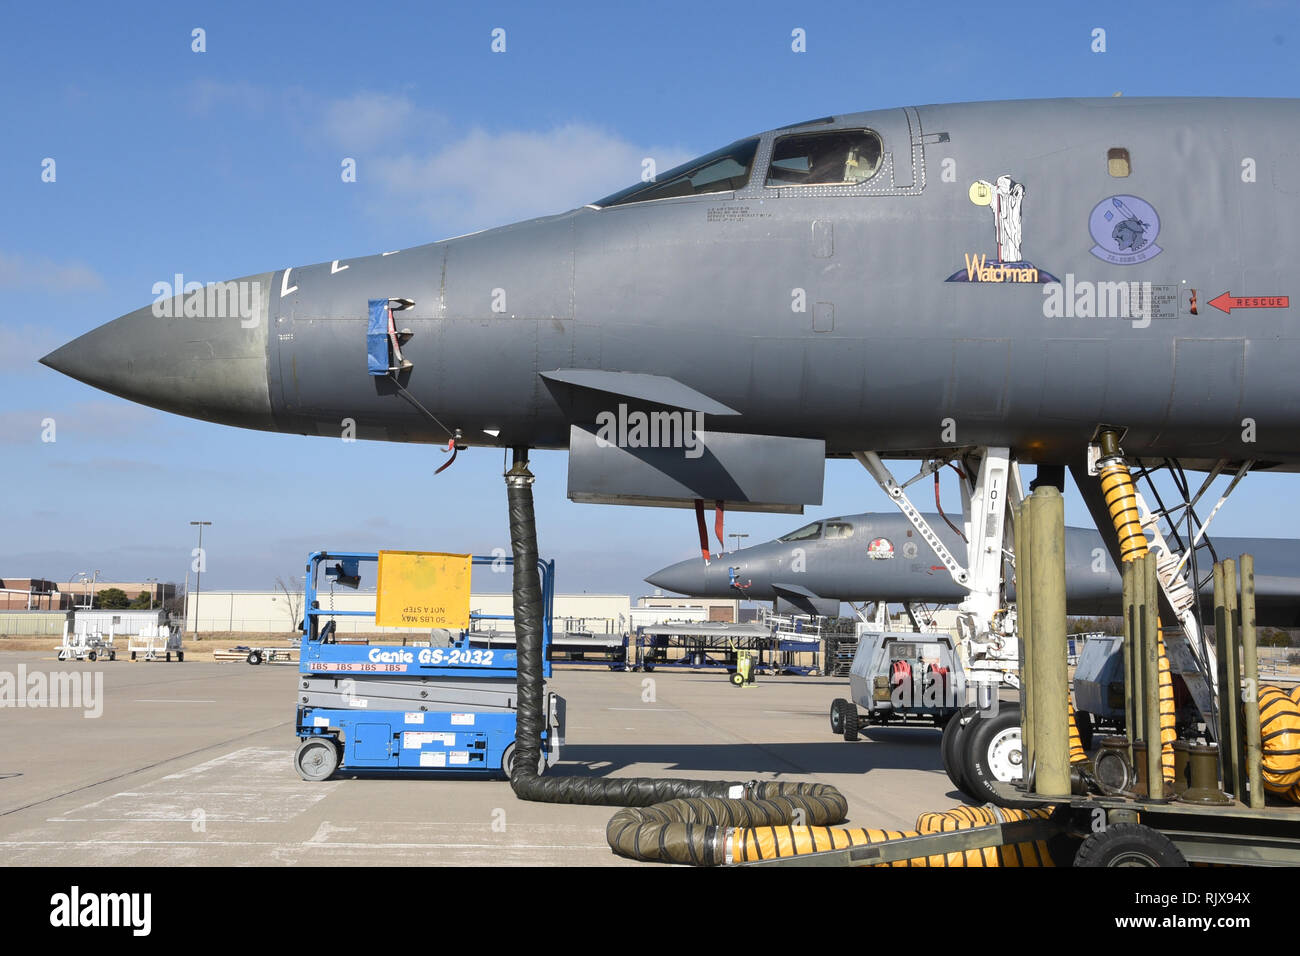 Boeing B-1B Lancer, serial # 86-0101, wearing 'Watchman' nose-art shown at the Maintenance, Repair and Overhaul Training Center Jan. 17, 2019, Tinker Air Force Base, Oklahoma. MROTC is a facility used for heavy aircraft maintenance in a public/private partnership between the Air Force and Boeing. (U.S. Air Force photo/Greg L. Davis) Stock Photo